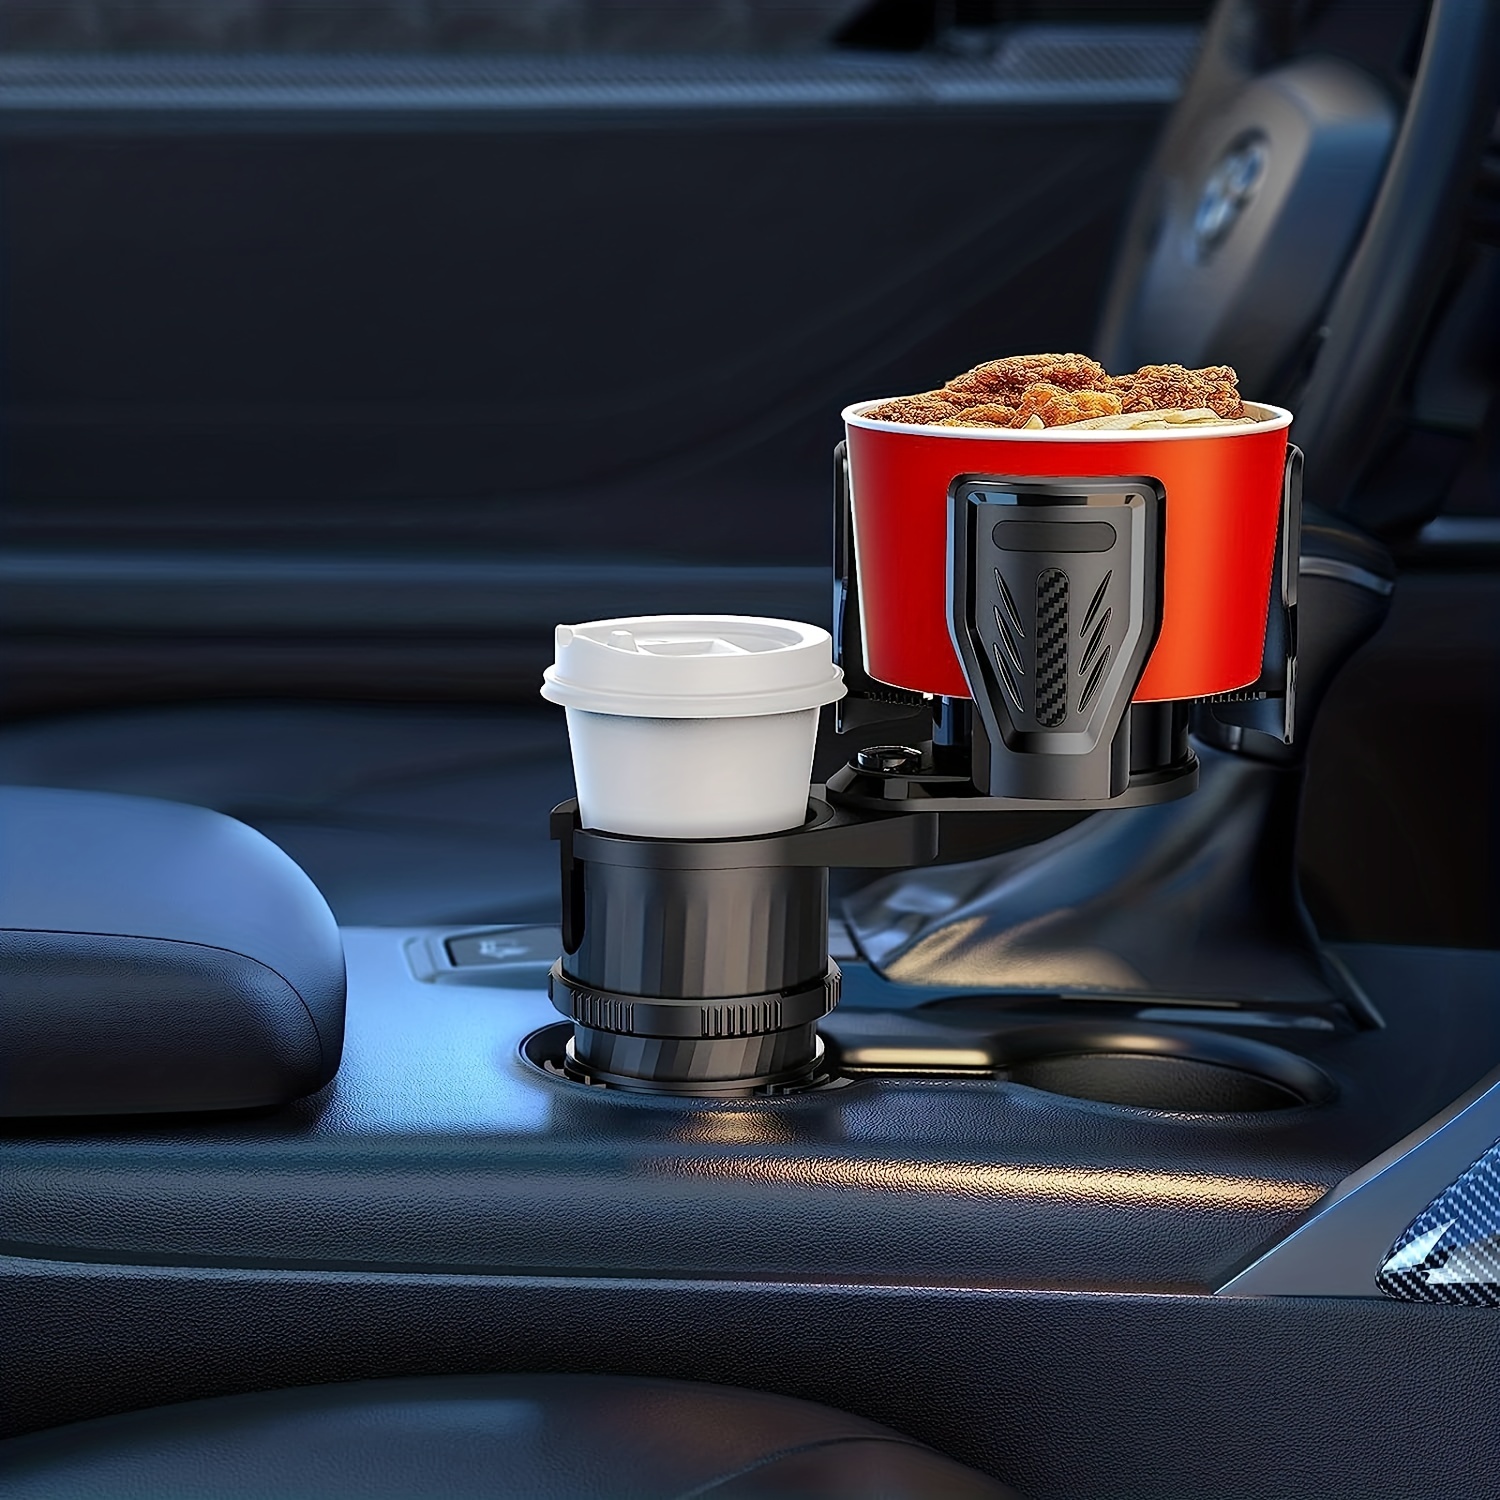 Upgraded 2 in 1 Multifunctional Car Cup Holder Expander Adjustable and  Stable Dual Cup Holder with Compass Vehicle Drink Cup Adapter for Most Car  Truc